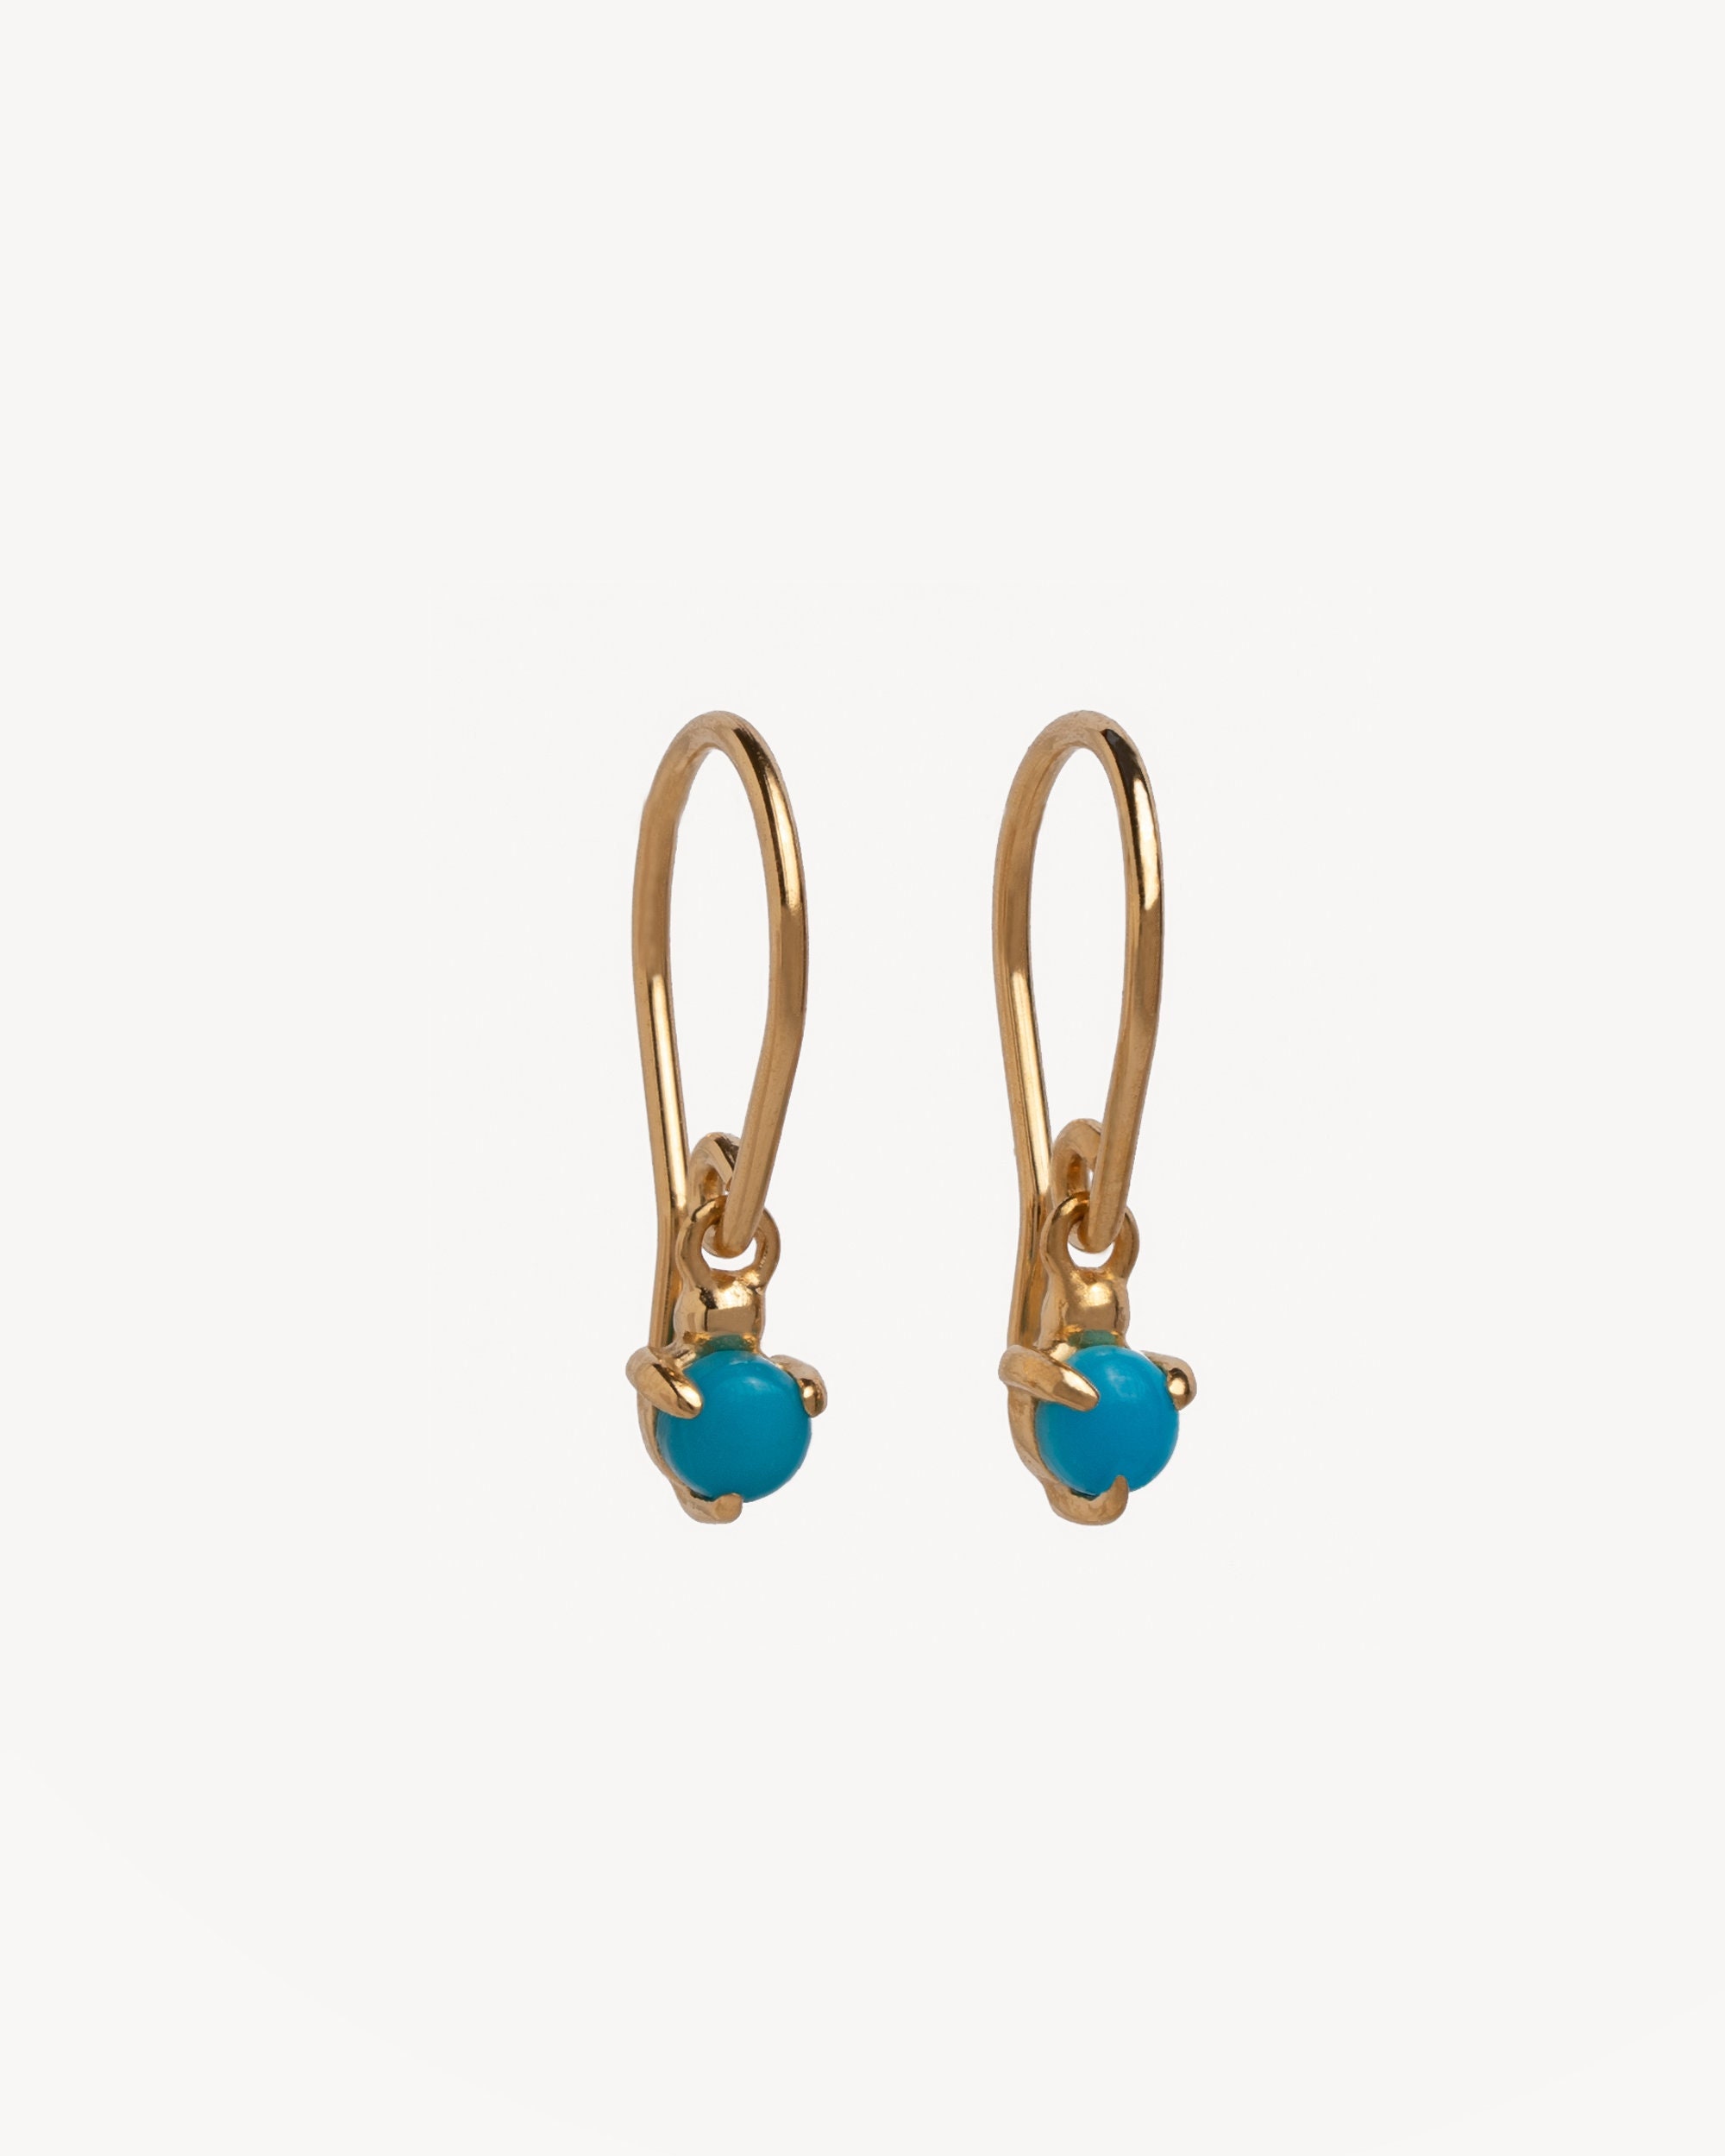 Natural Stone Wire Wrap Dangle Drop Earrings Gold Plated 925 Sterling Silver Hook/Turquoise Round Cut